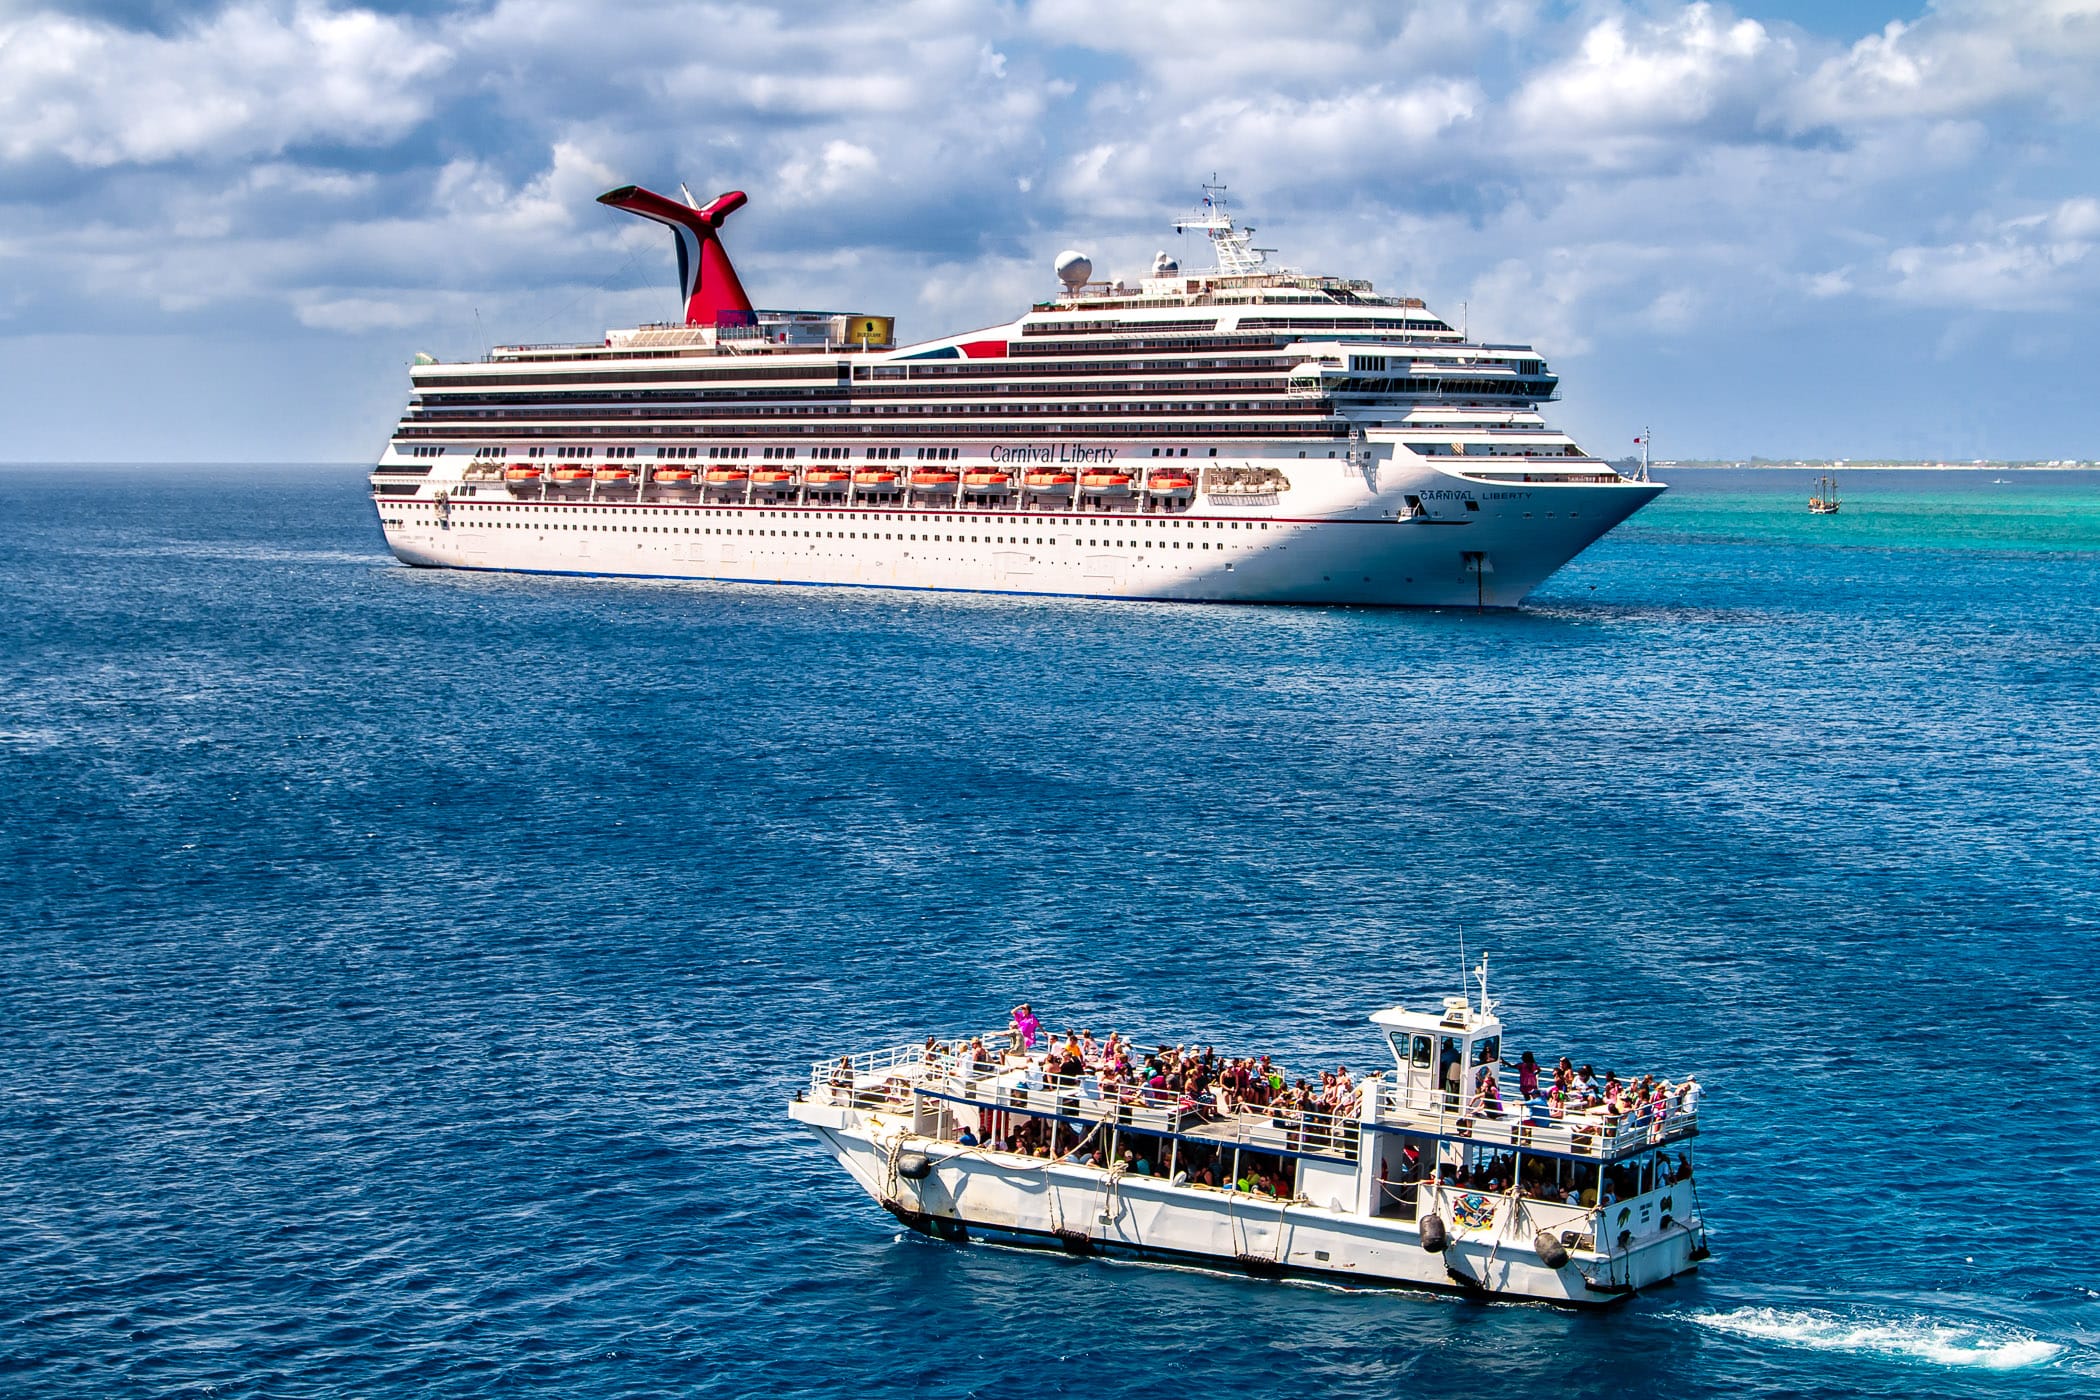 A cruise ship tender—used to transport passengers between a port and a ship when the ship is unable to dock directly due to shallow water or other reasons—passes the Carnival Liberty just off the coast of George Town, Grand Cayman.